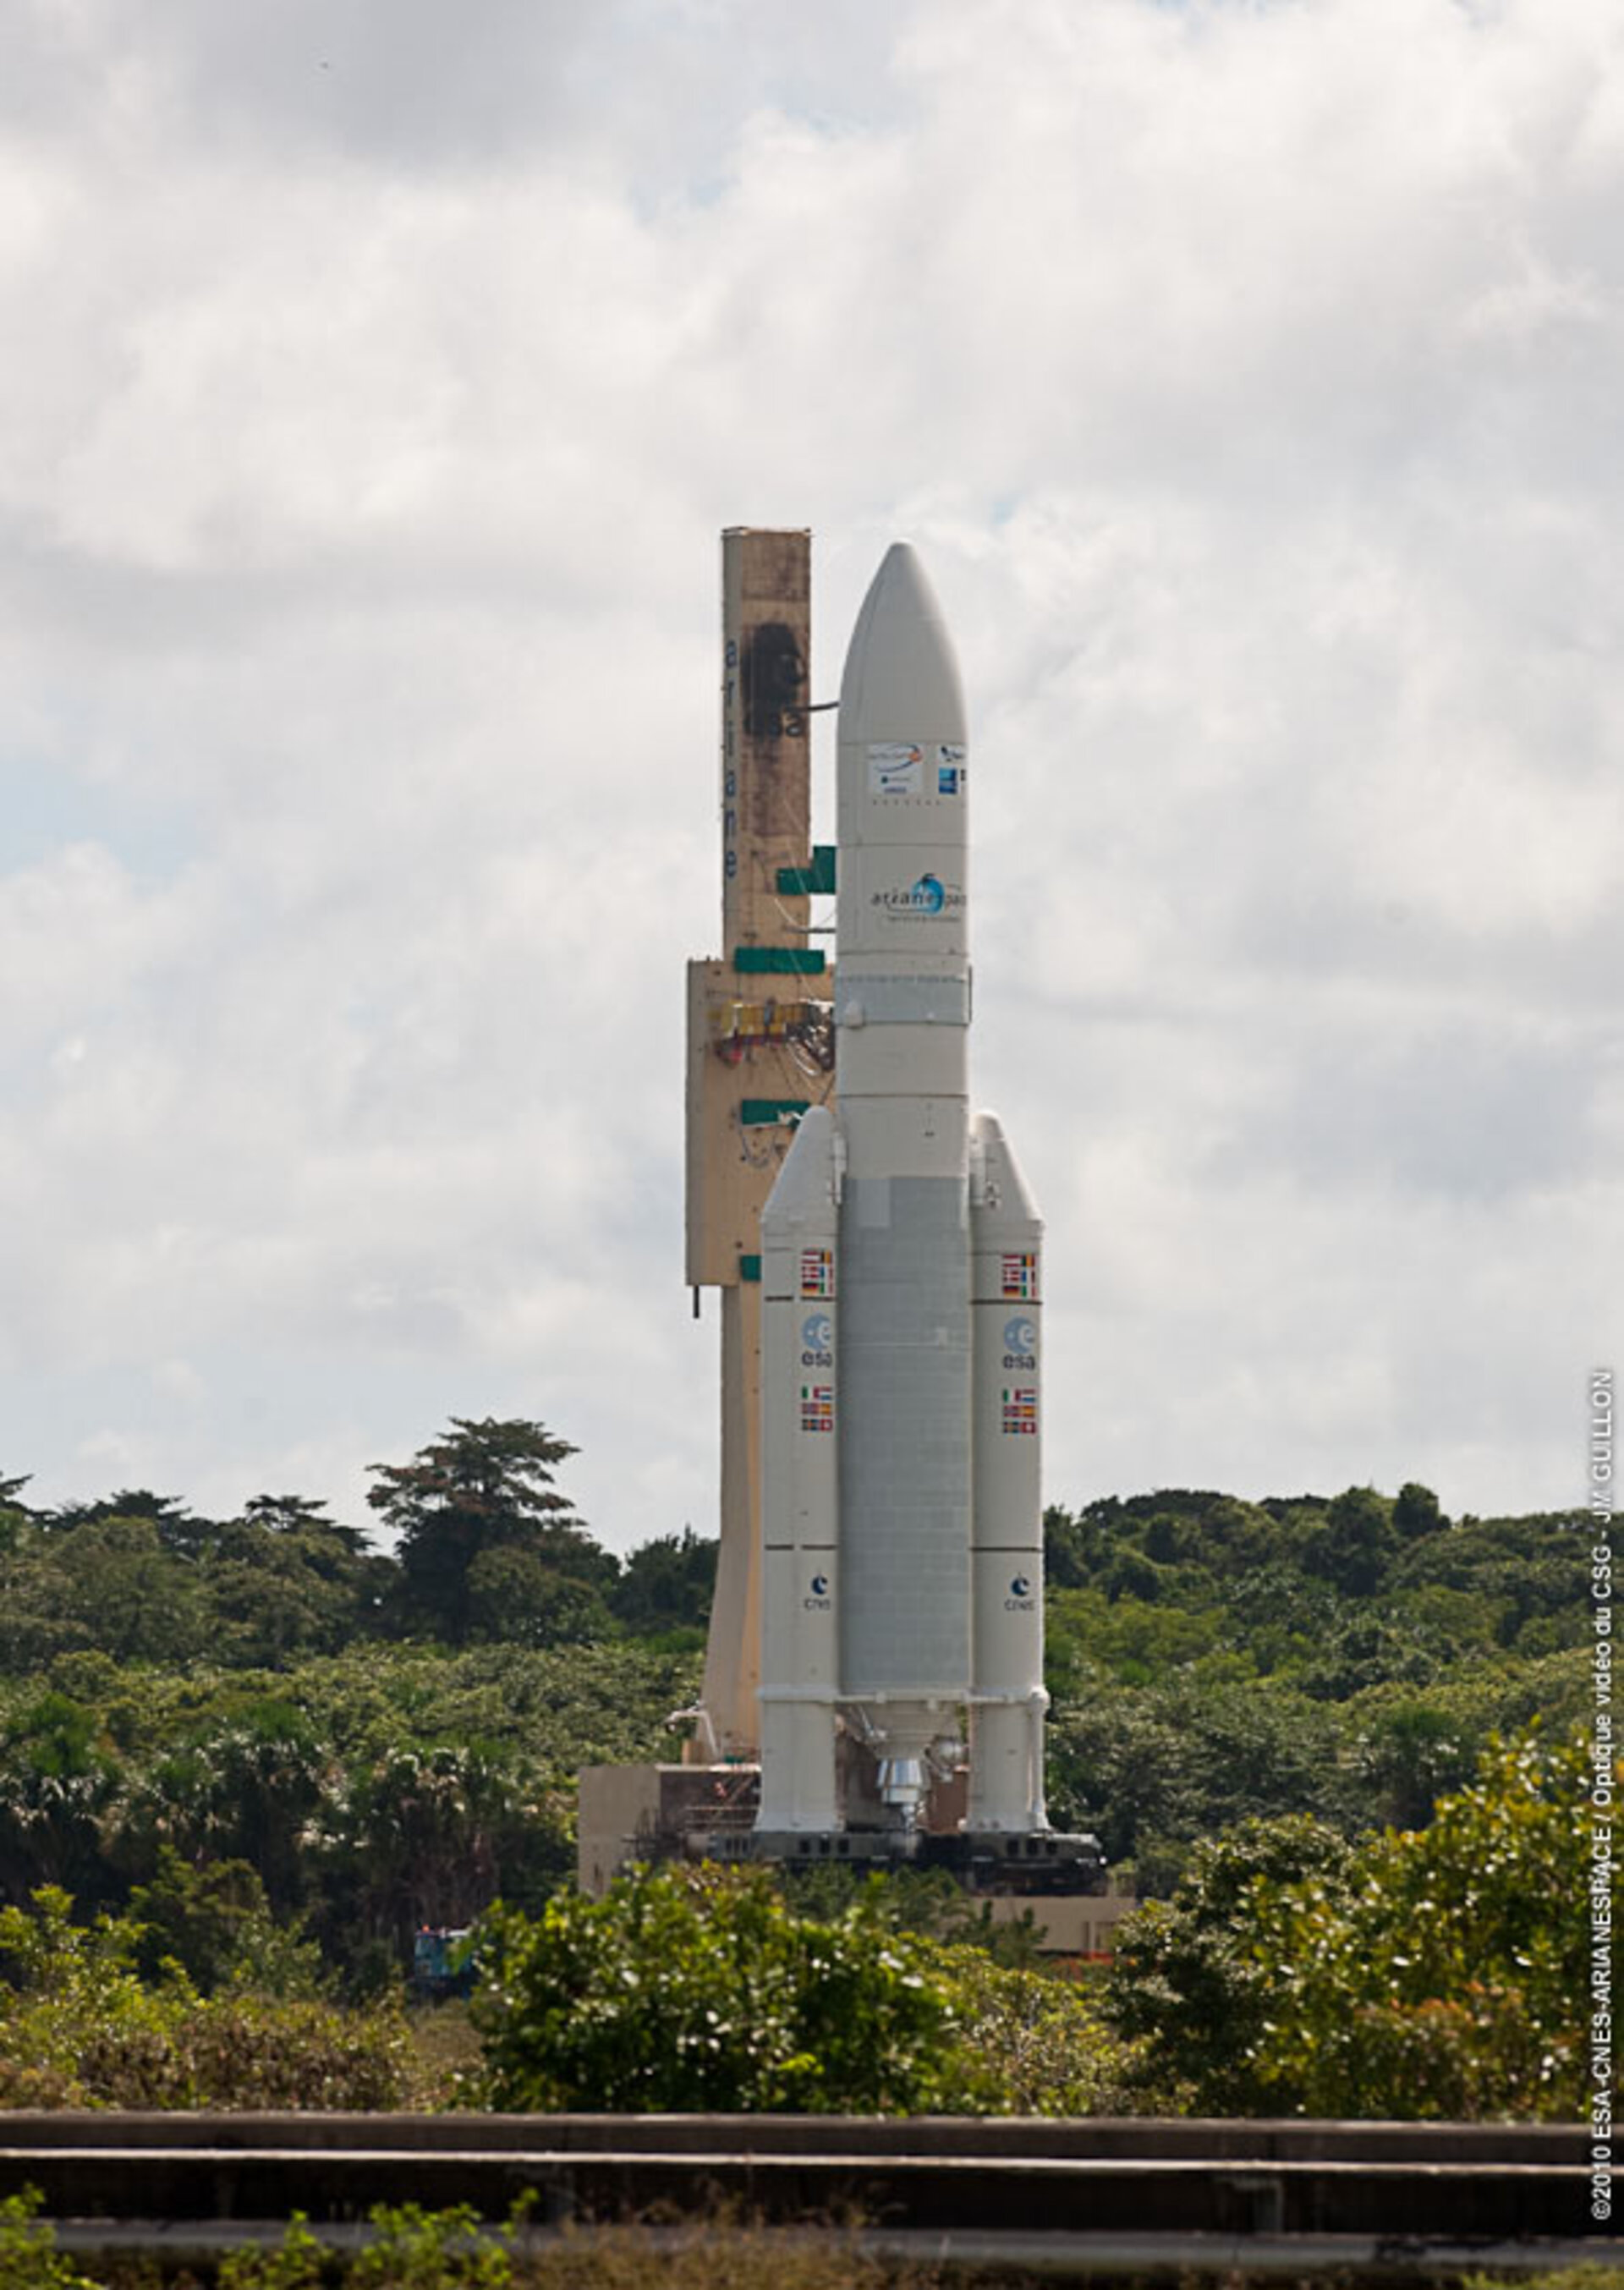 Hylas-1 in its launcher, on its way to launch pad